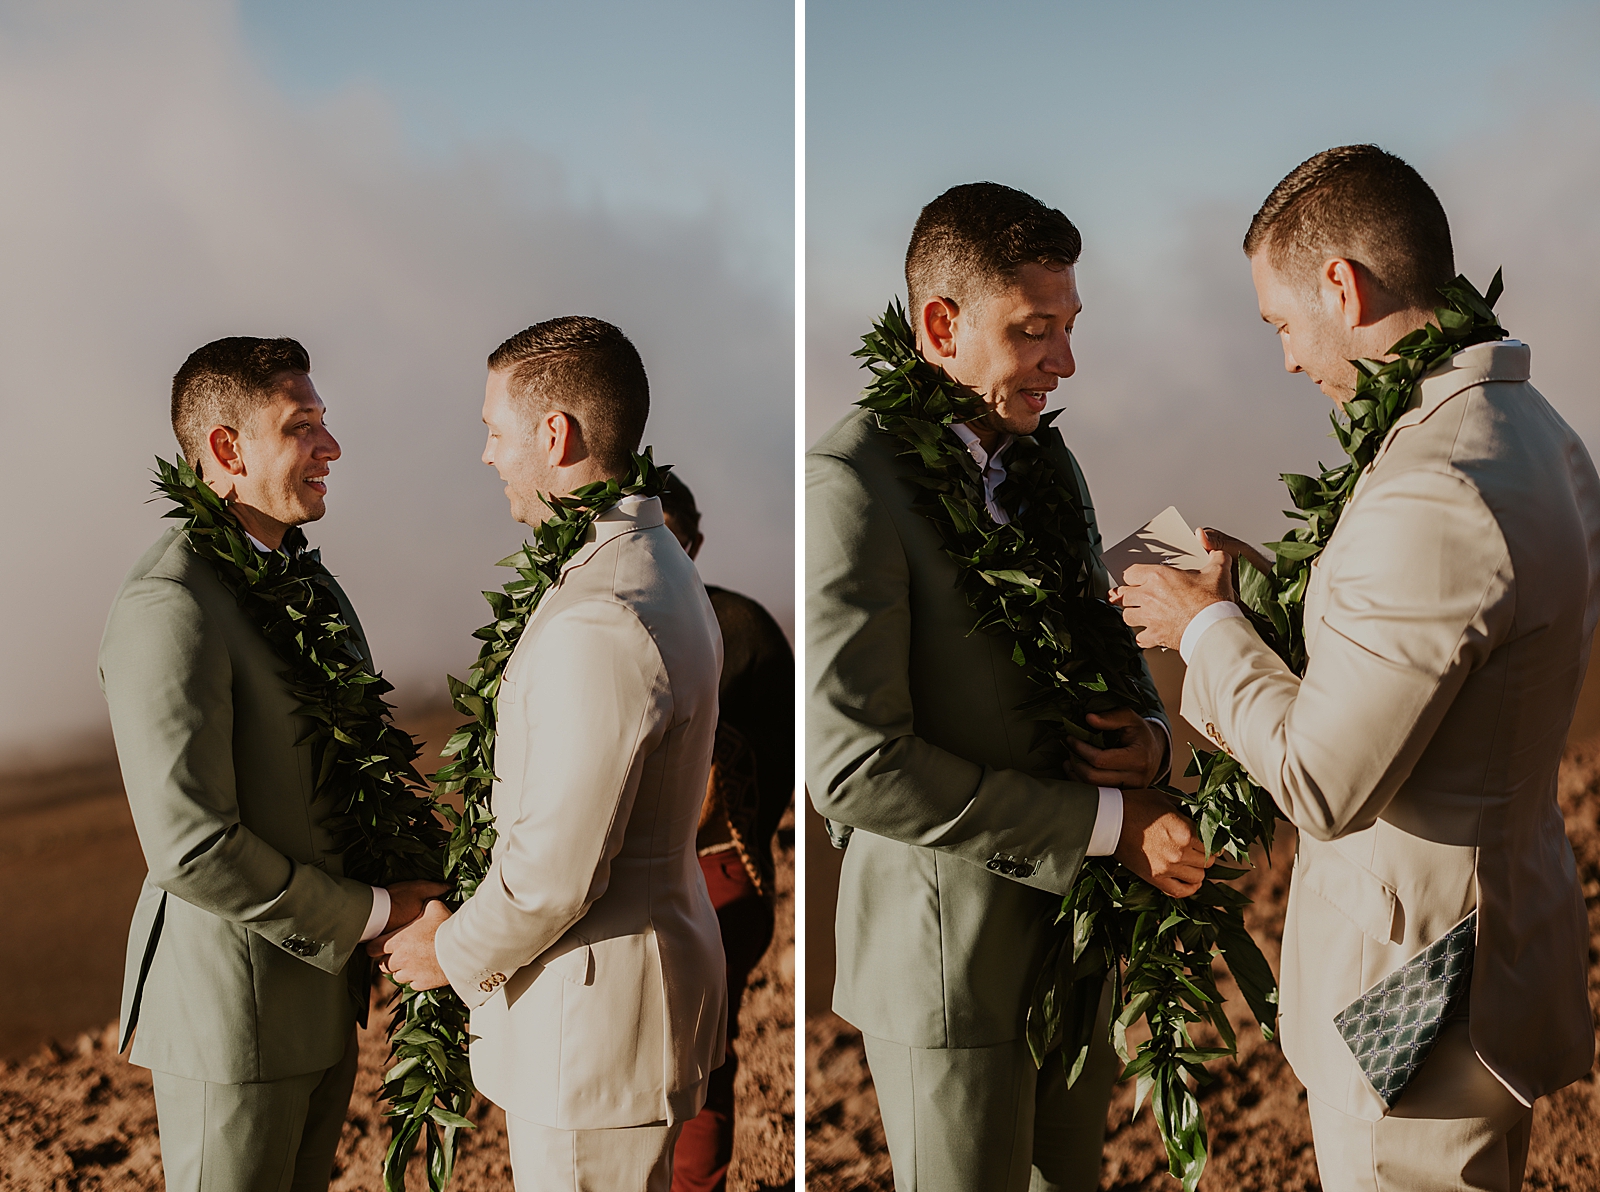 Grooms saying vows to each other for Elopement